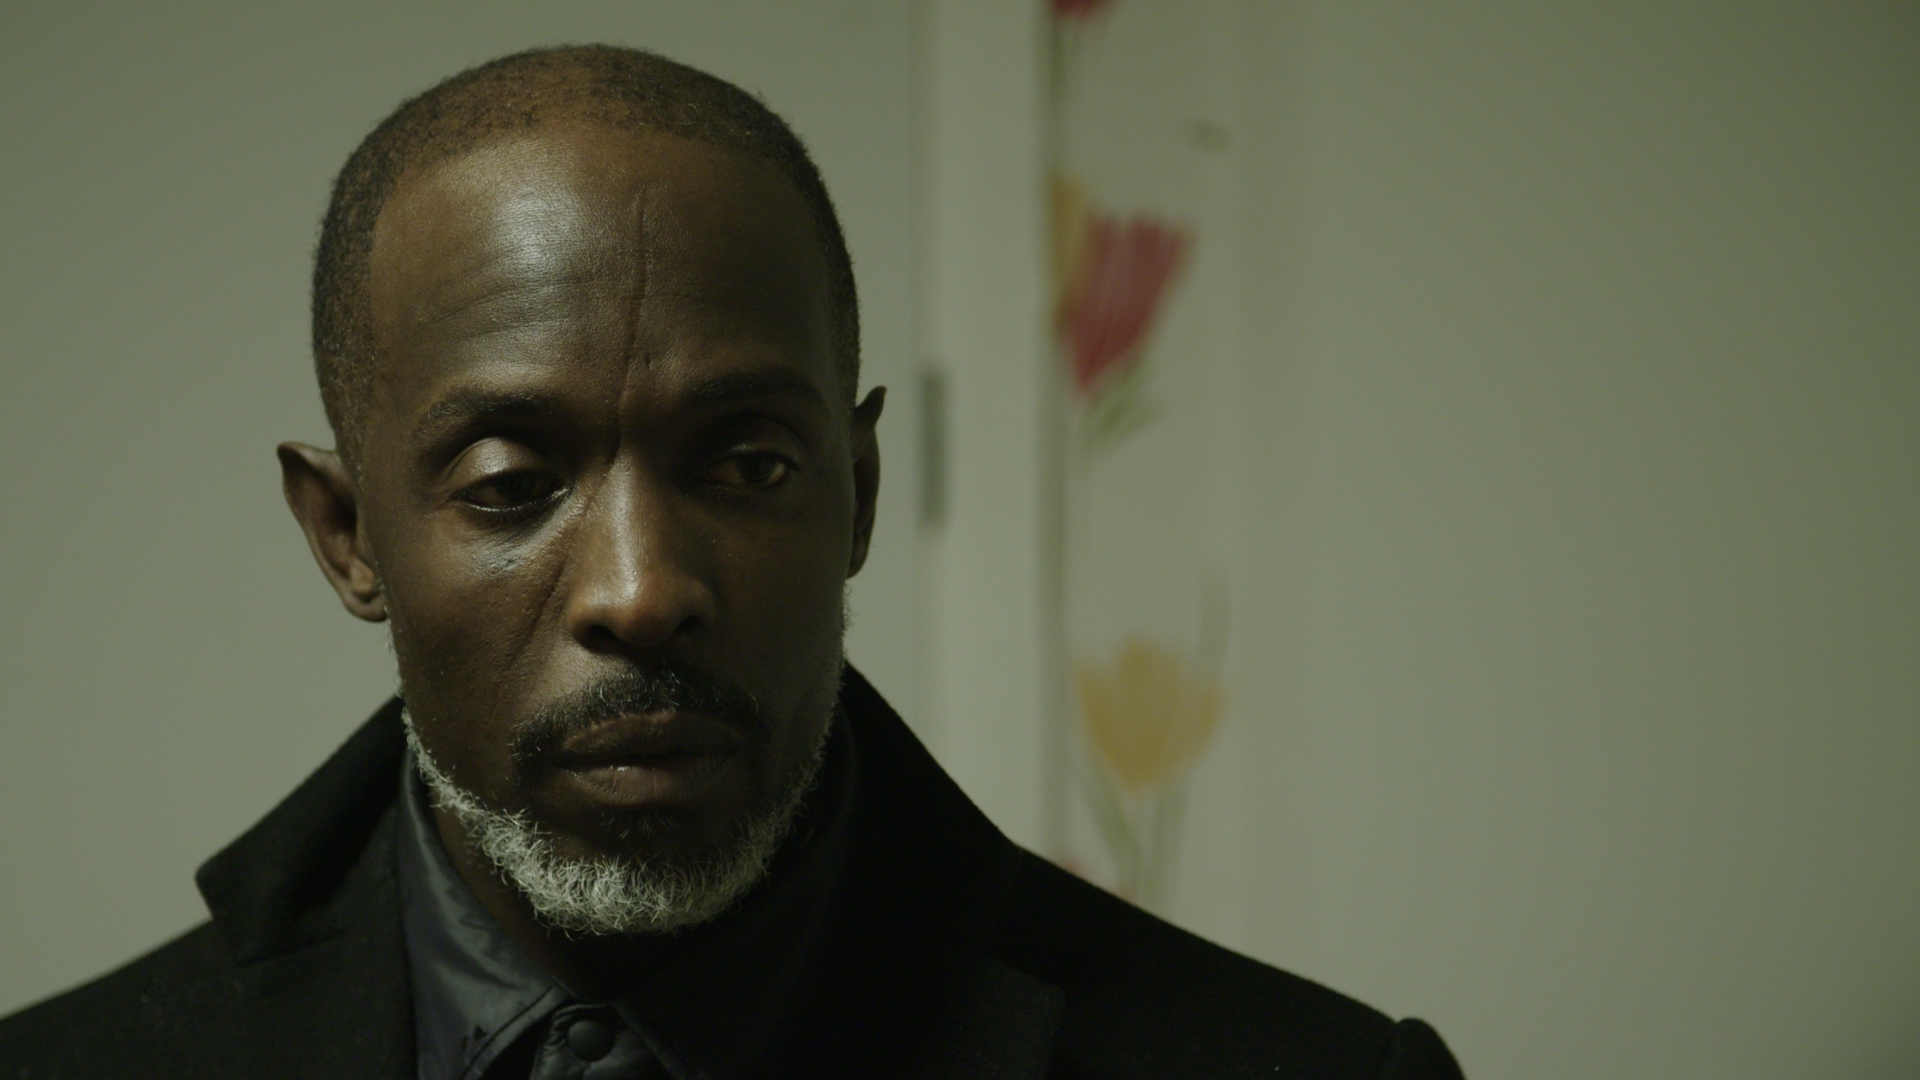 VICELAND's Black Market with Michael K Williams